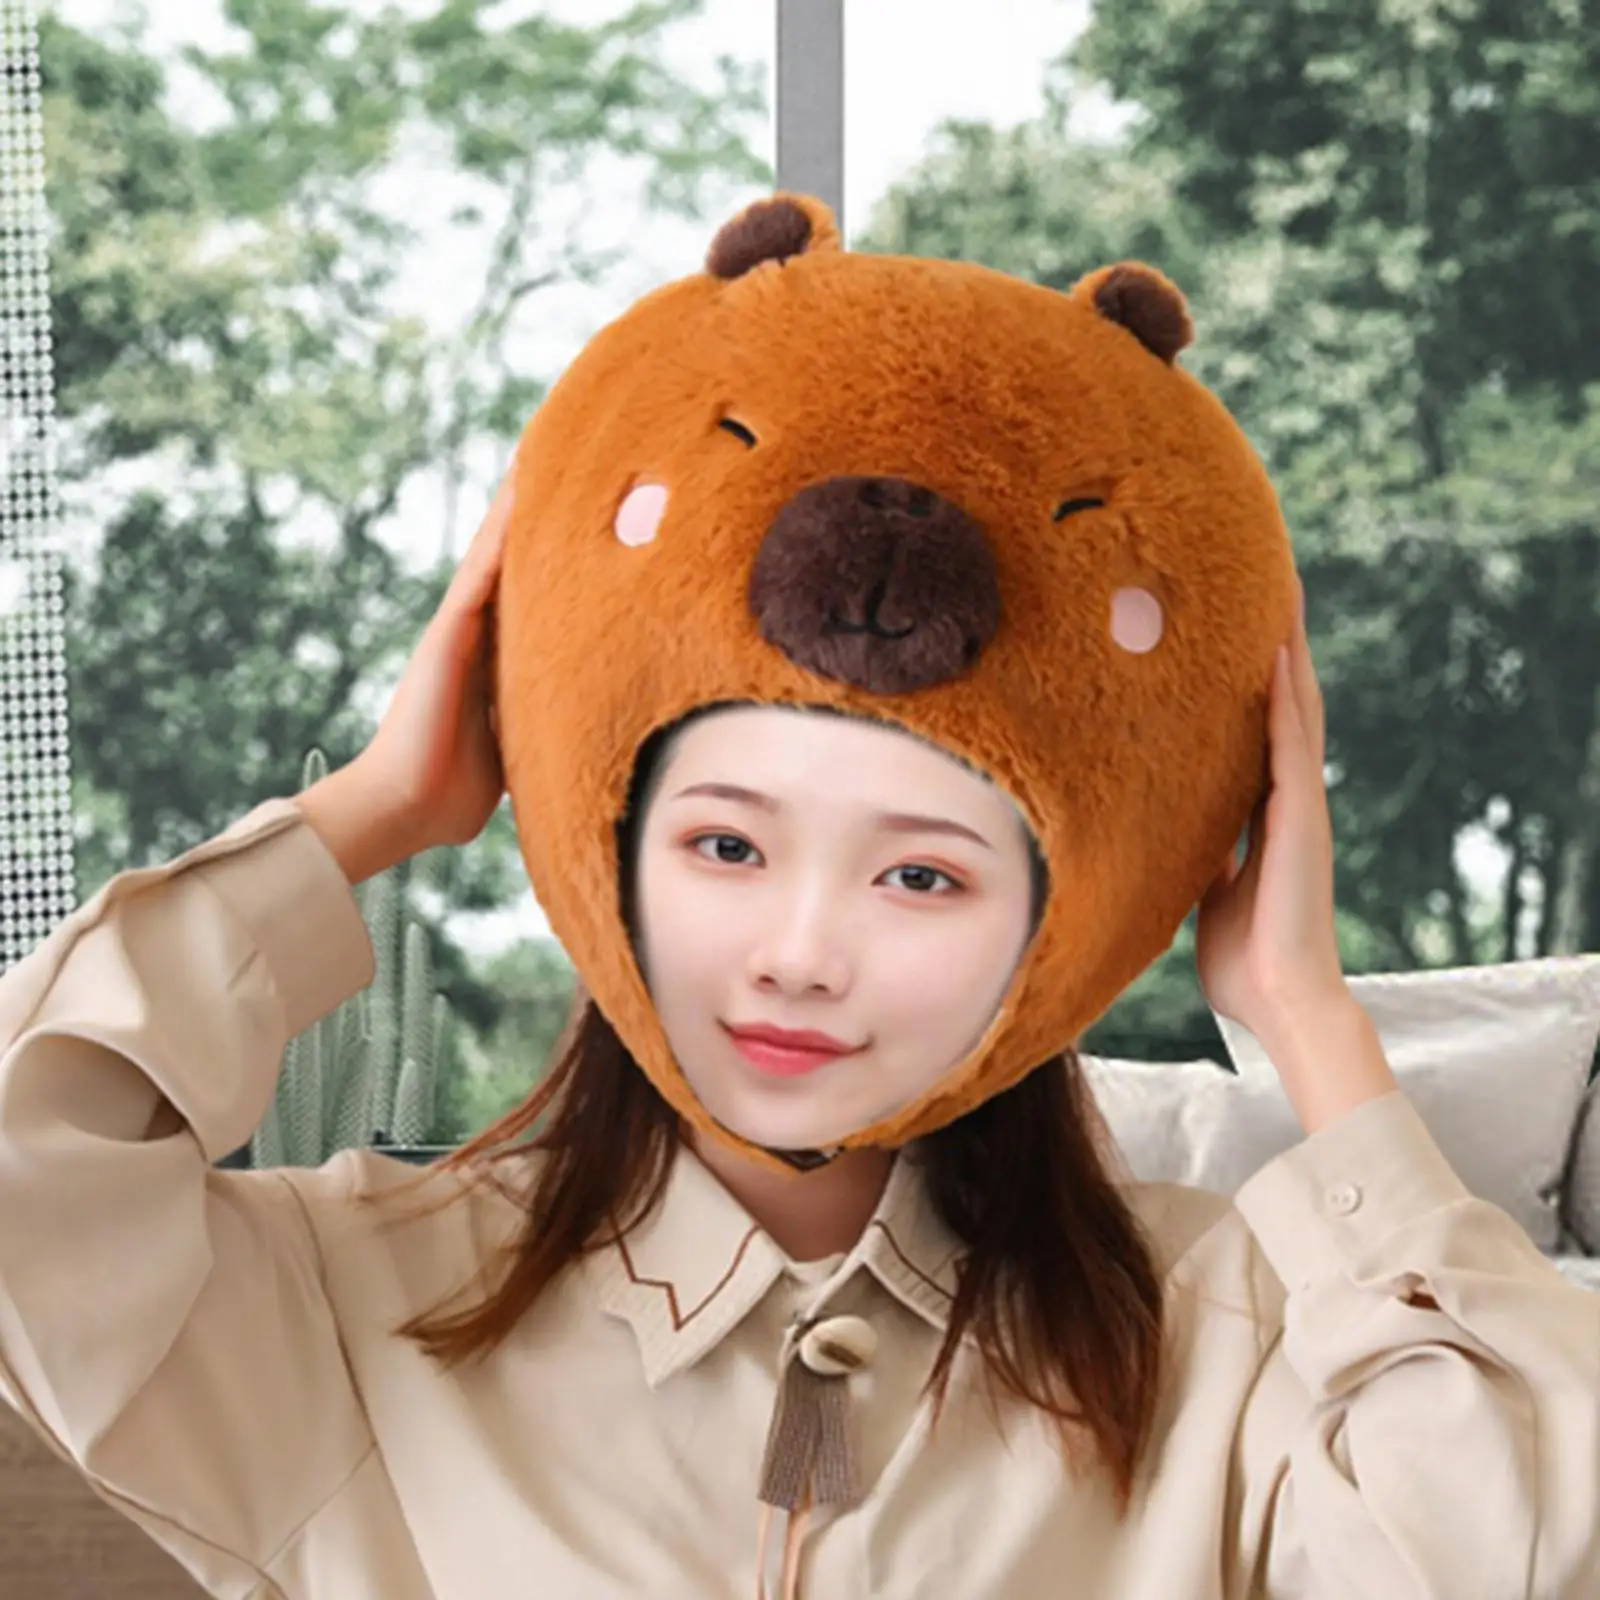 Plush Animal Hat Boys Girls Costume Accessories Capybara Headwear for Holiday Carnival Birthday Party Role Play Masquerade Ball